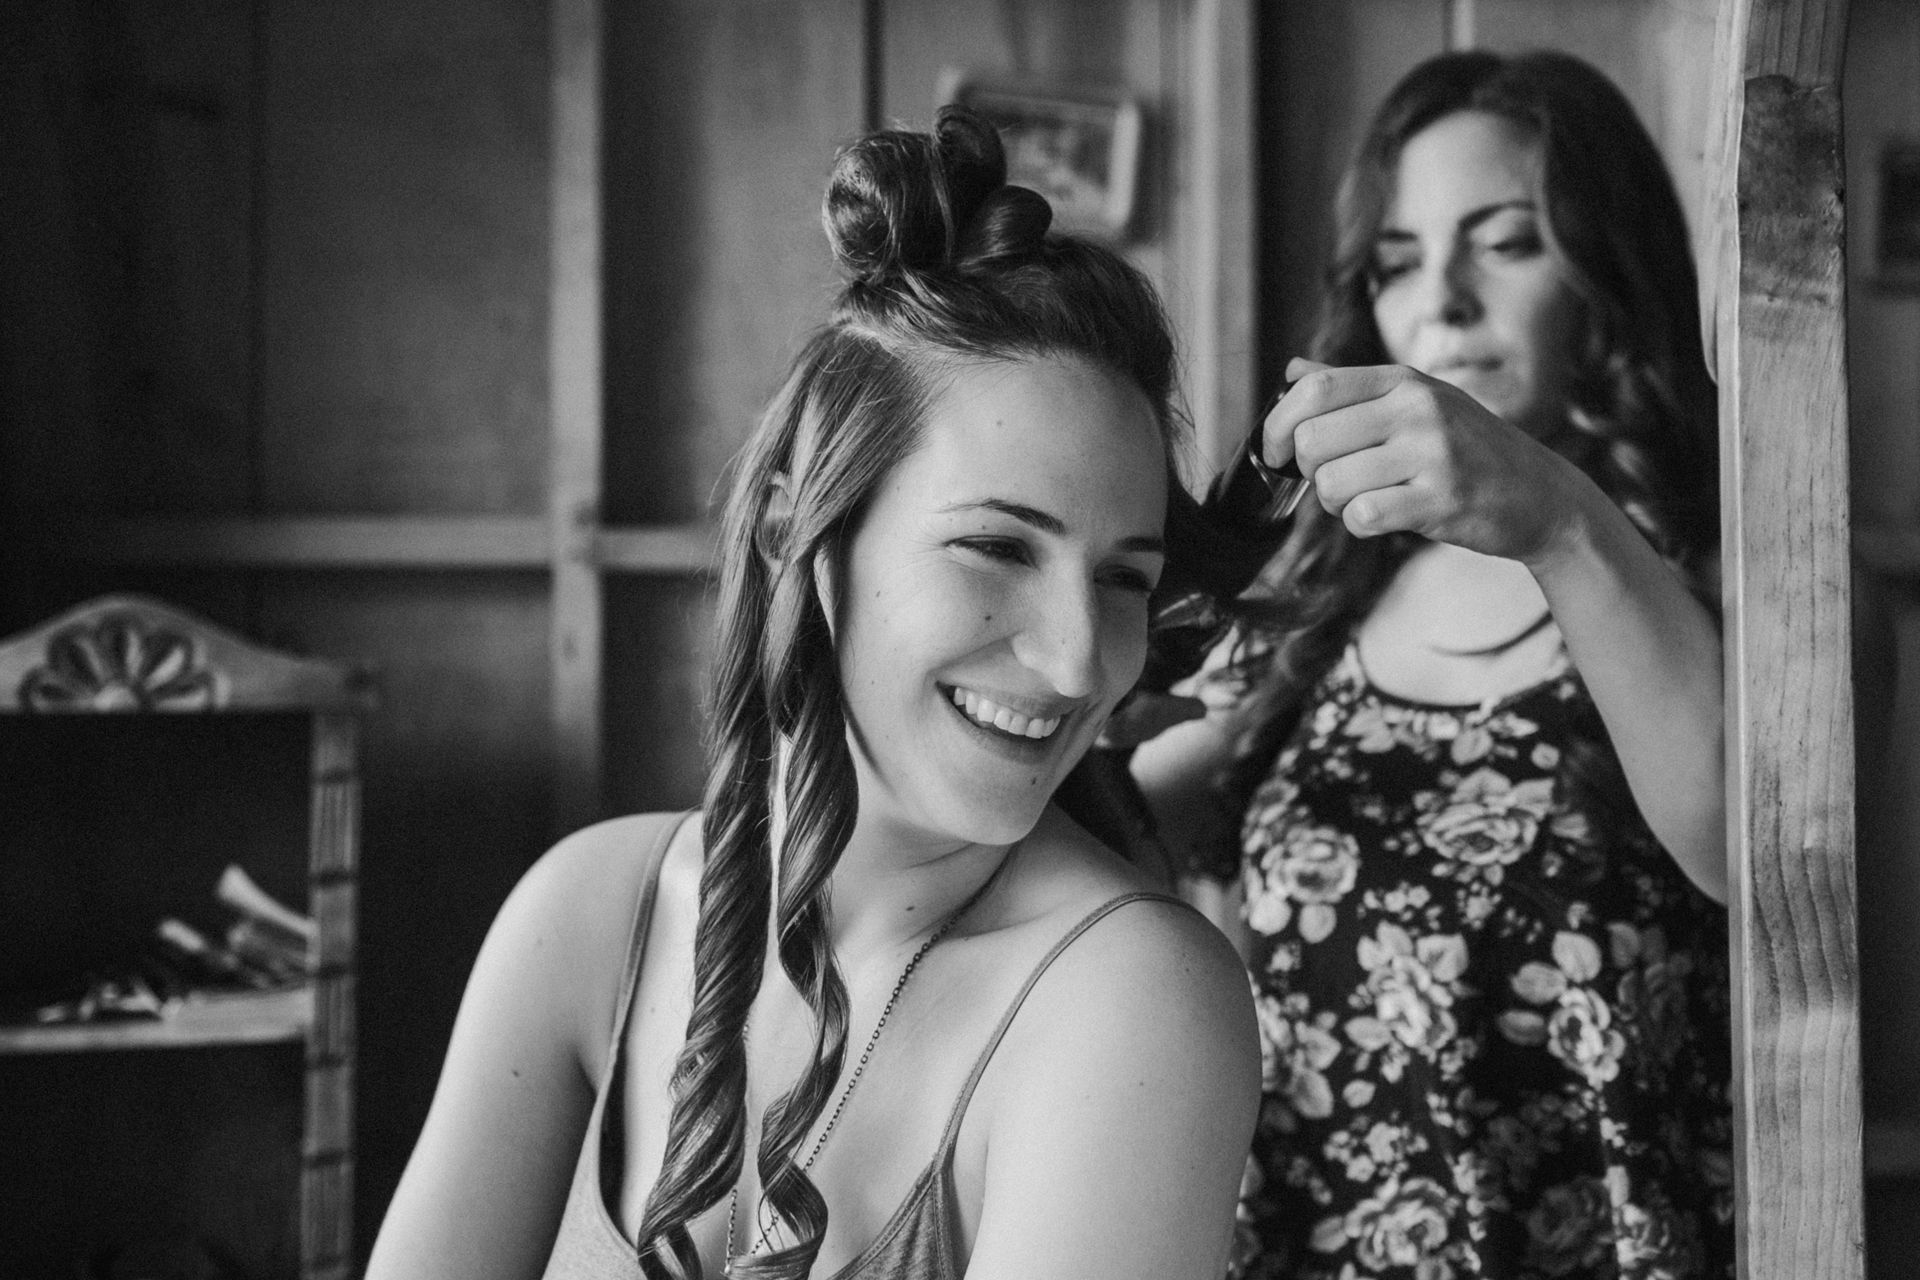  The bride to be getting her hair and makeup done before the wedding 